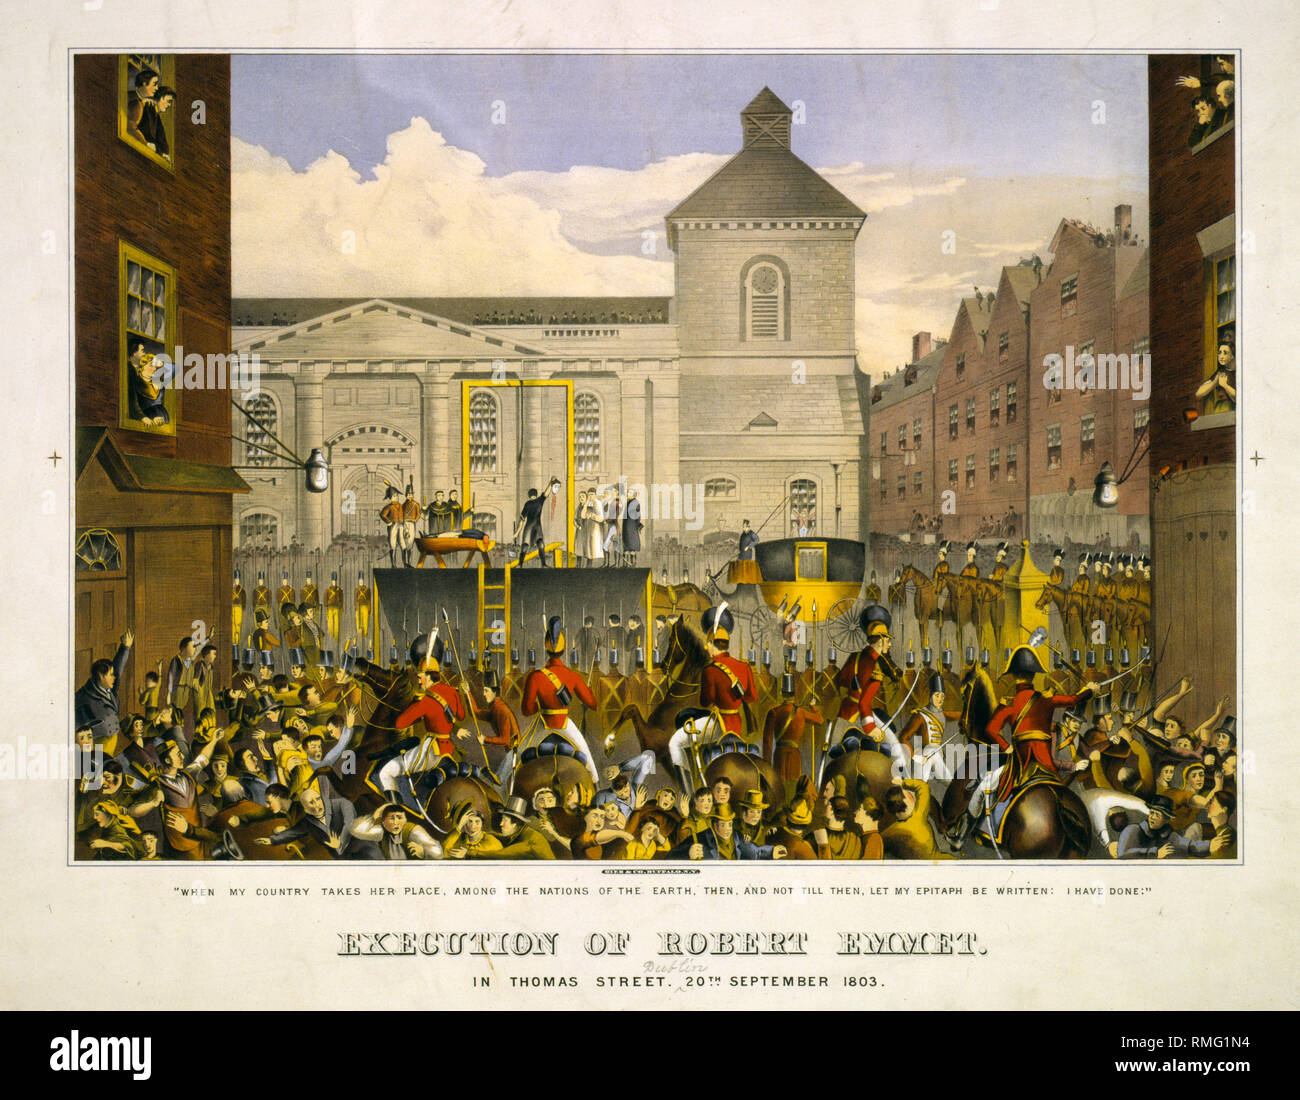 Lithograph of the execution of irish republican and nationalist  robert emmet by the british in 1803. Emmet lead the rebellion of 1803 and was caught and tried for treason and then hung drawn and quartered in thomas street dublin on 20th september 1803 Stock Photo